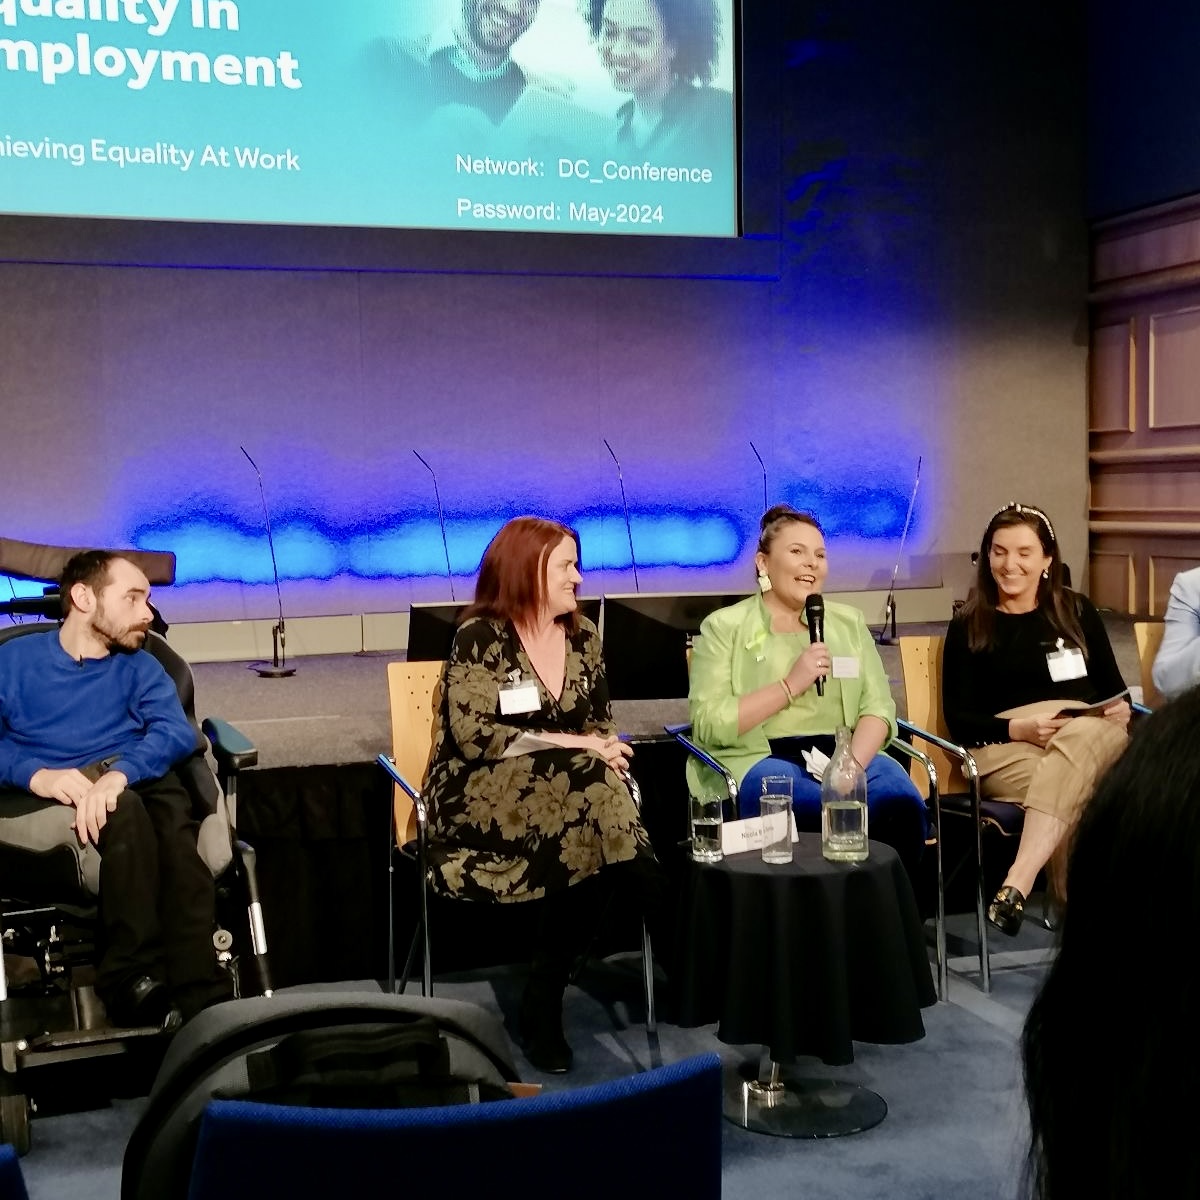 📣 @MHReform today attended the @_IHREC Conference 'Achieving Equality at Work'. Great to see our member organisation @Shineonlineirel speaking to highlight the needs of those with psychosocial disability in employment. #EqualityAtWork